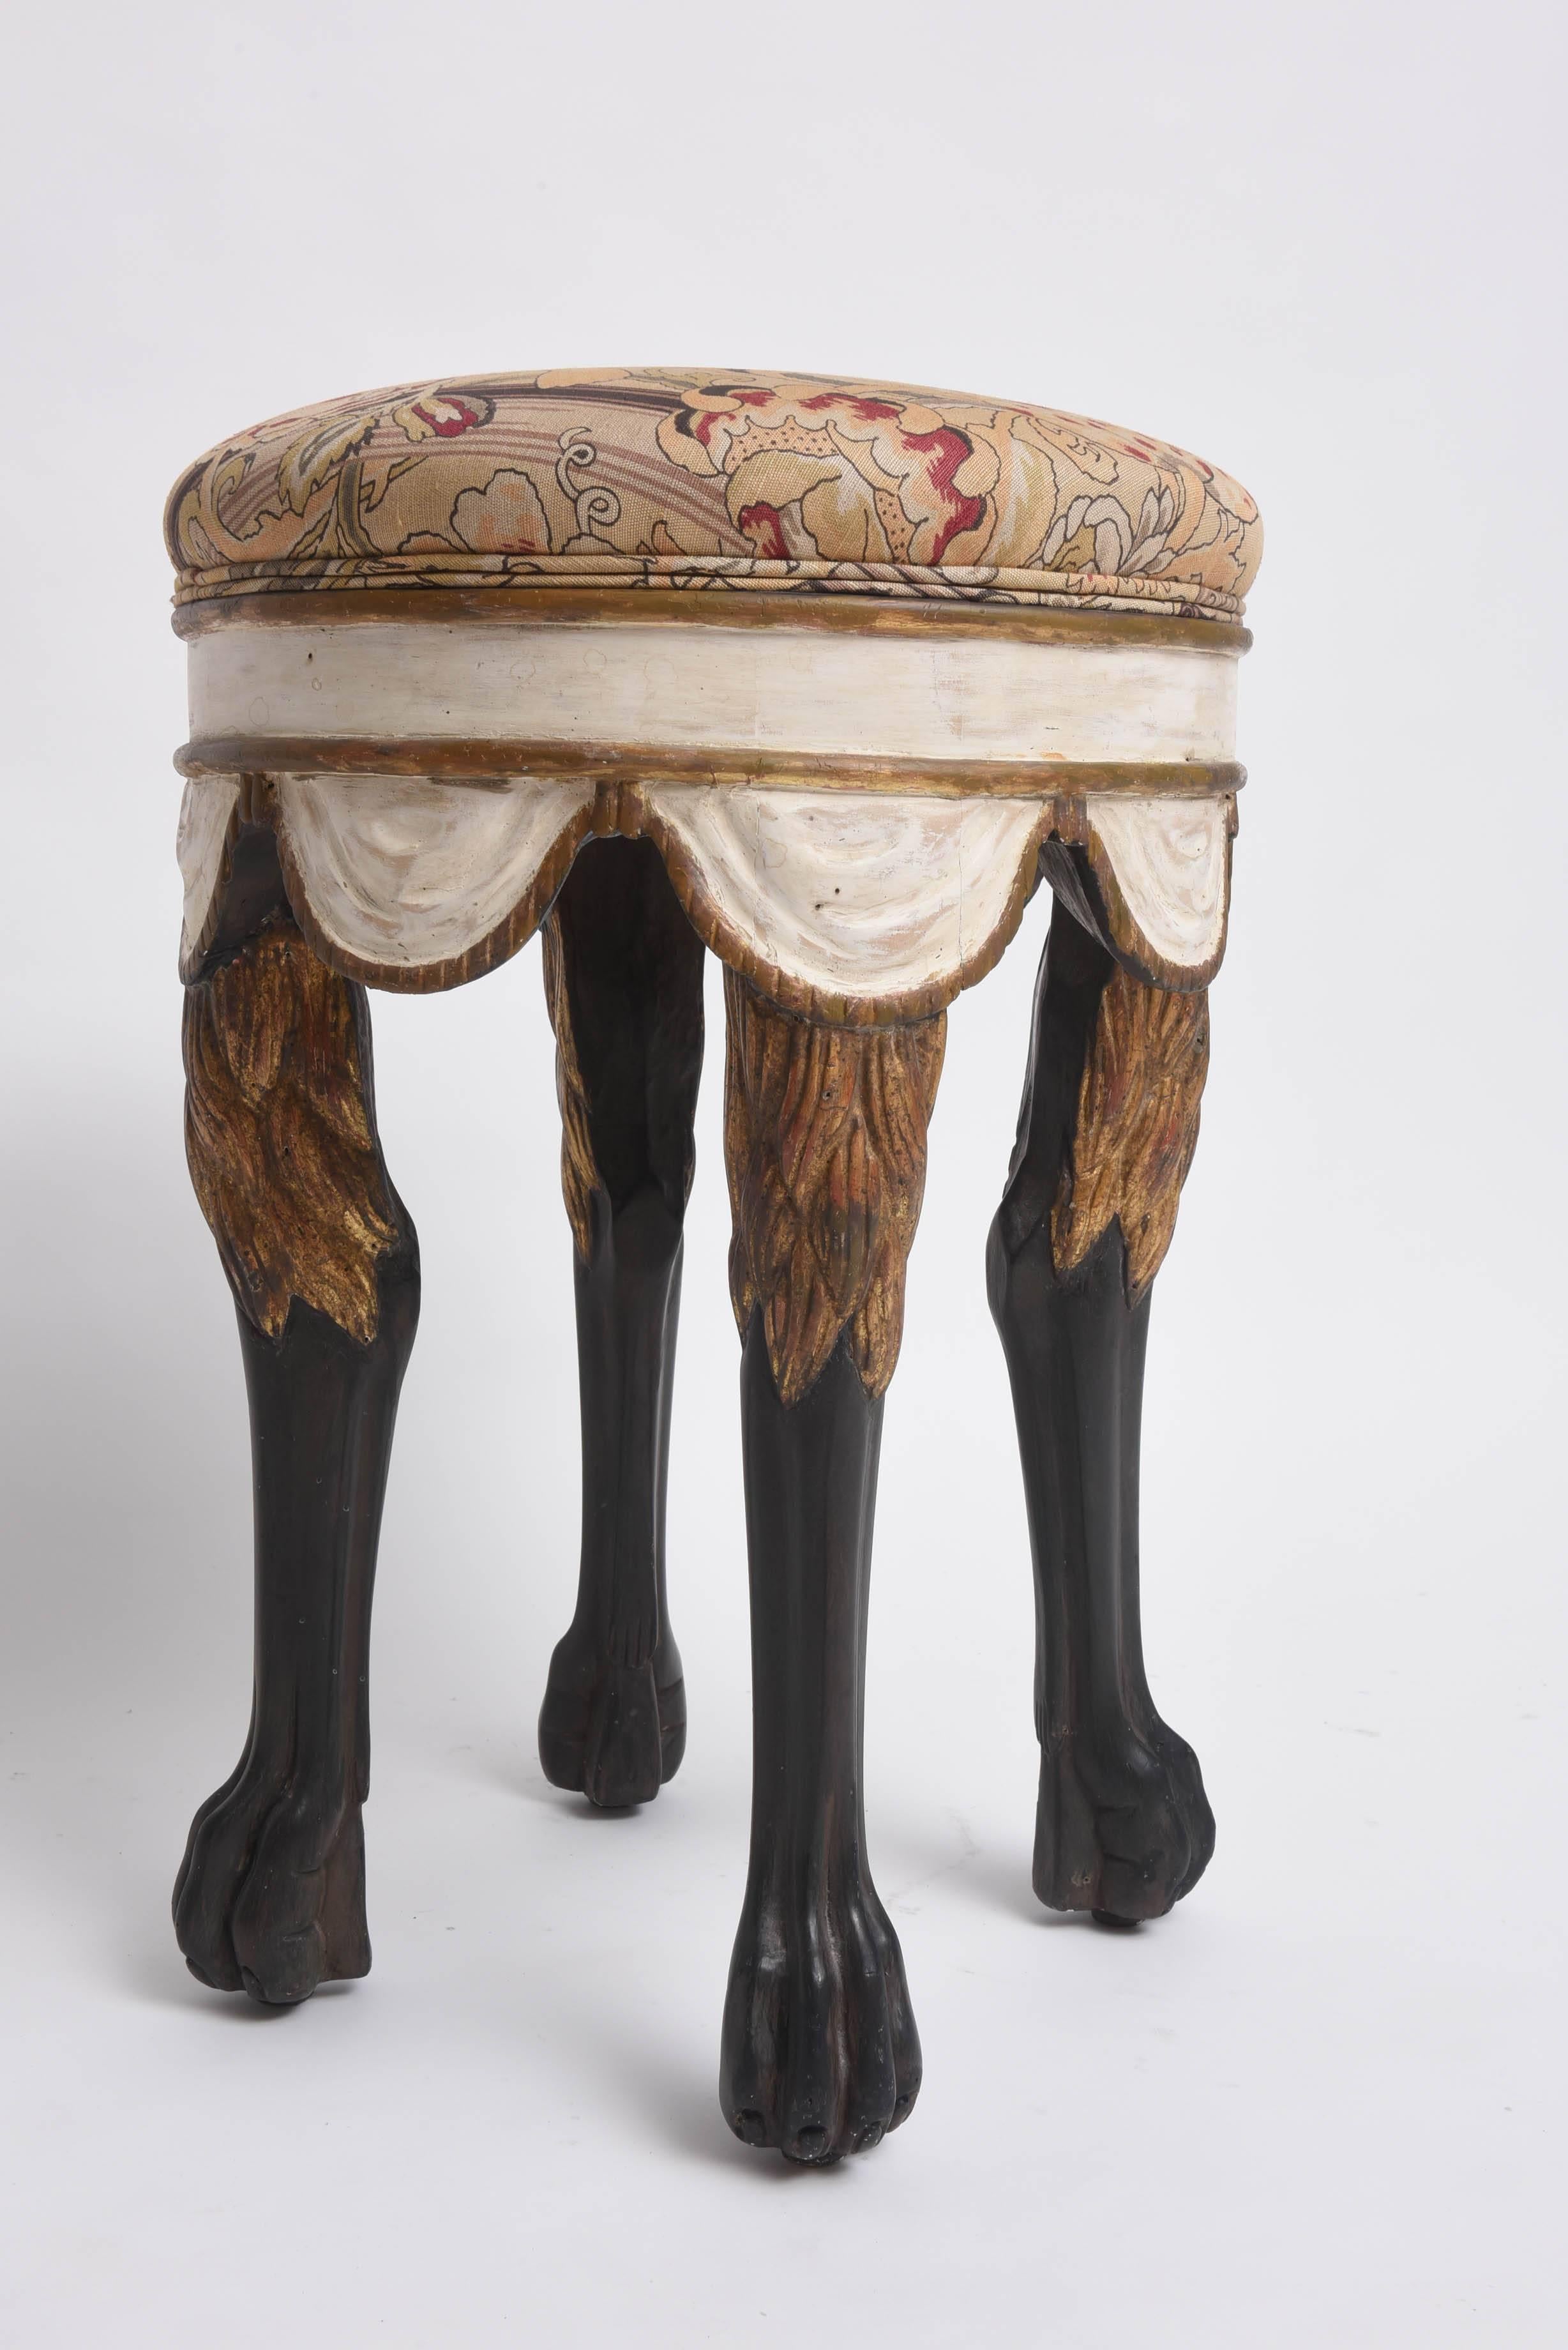 Hand-Painted Neopolitan Style Italian Stool  For Sale